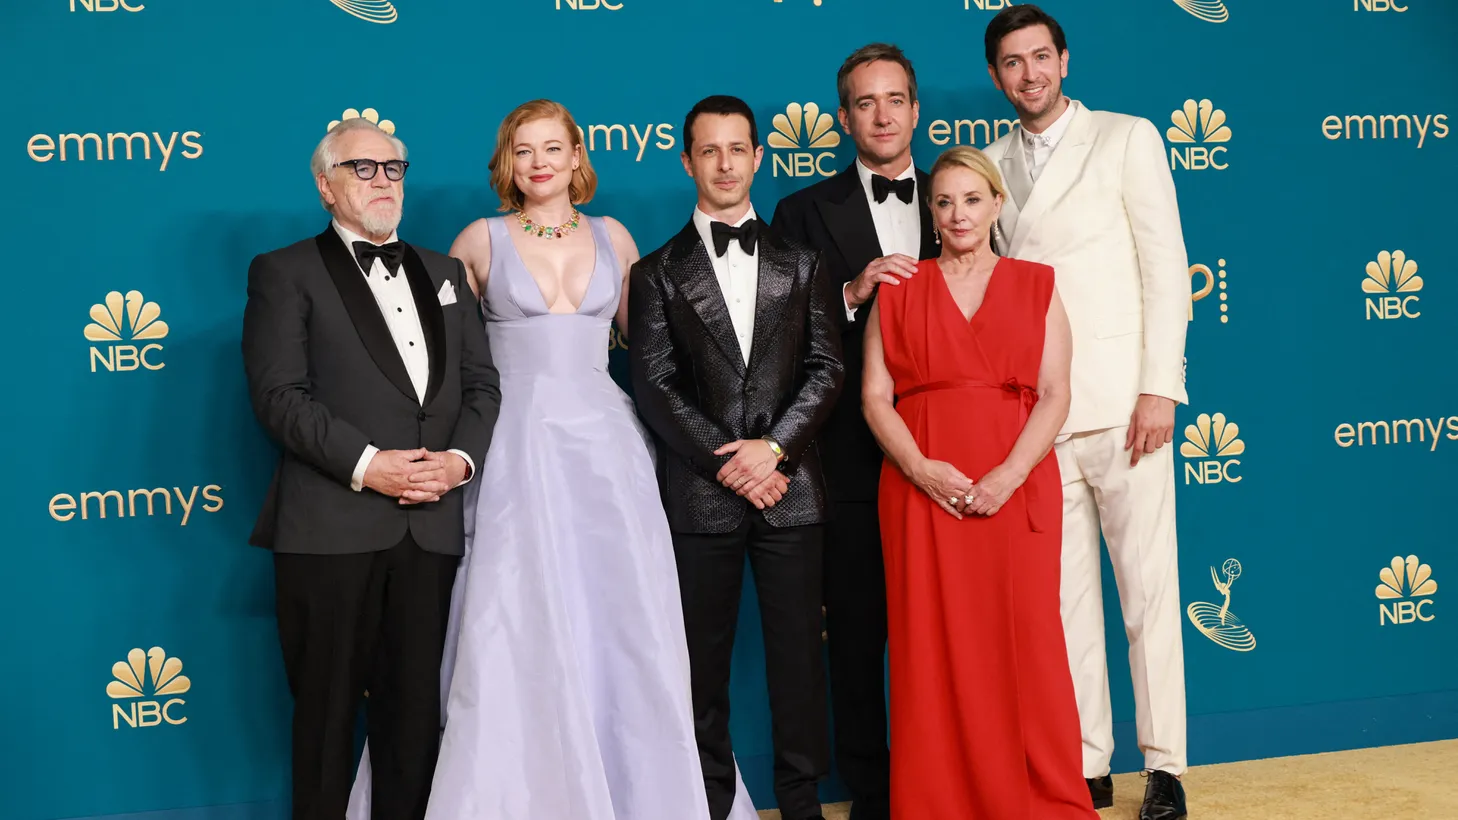 The cast of "Succession" pose for a picture after it won the Emmy for Outstanding Drama Series, at the 74th Primetime Emmy Awards held at the Microsoft Theater in Los Angeles, on September 12, 2022.